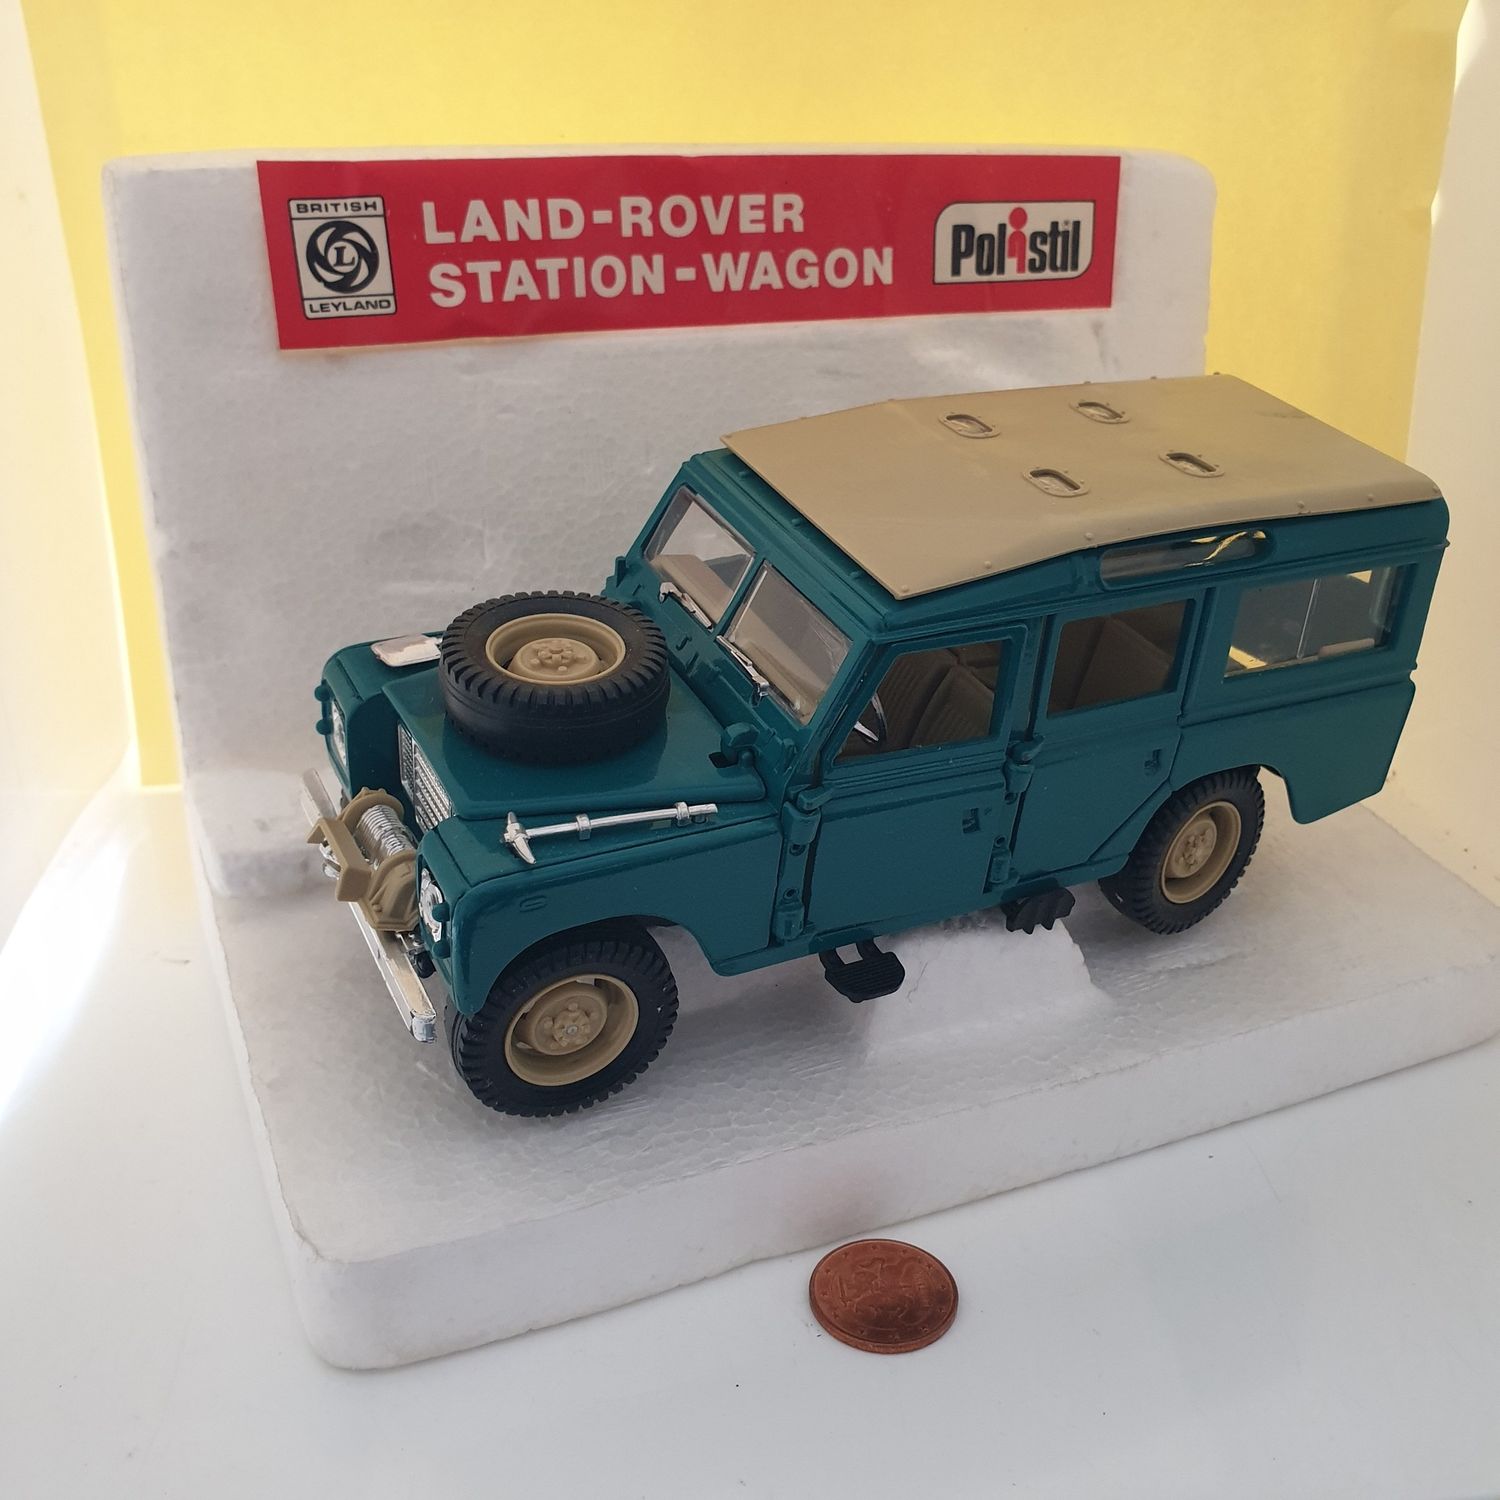 Rare 1979 Polistil Land Rover Sw - Large Scale 1/25 S649 - Made in Italy - box in poor condition (YD209)